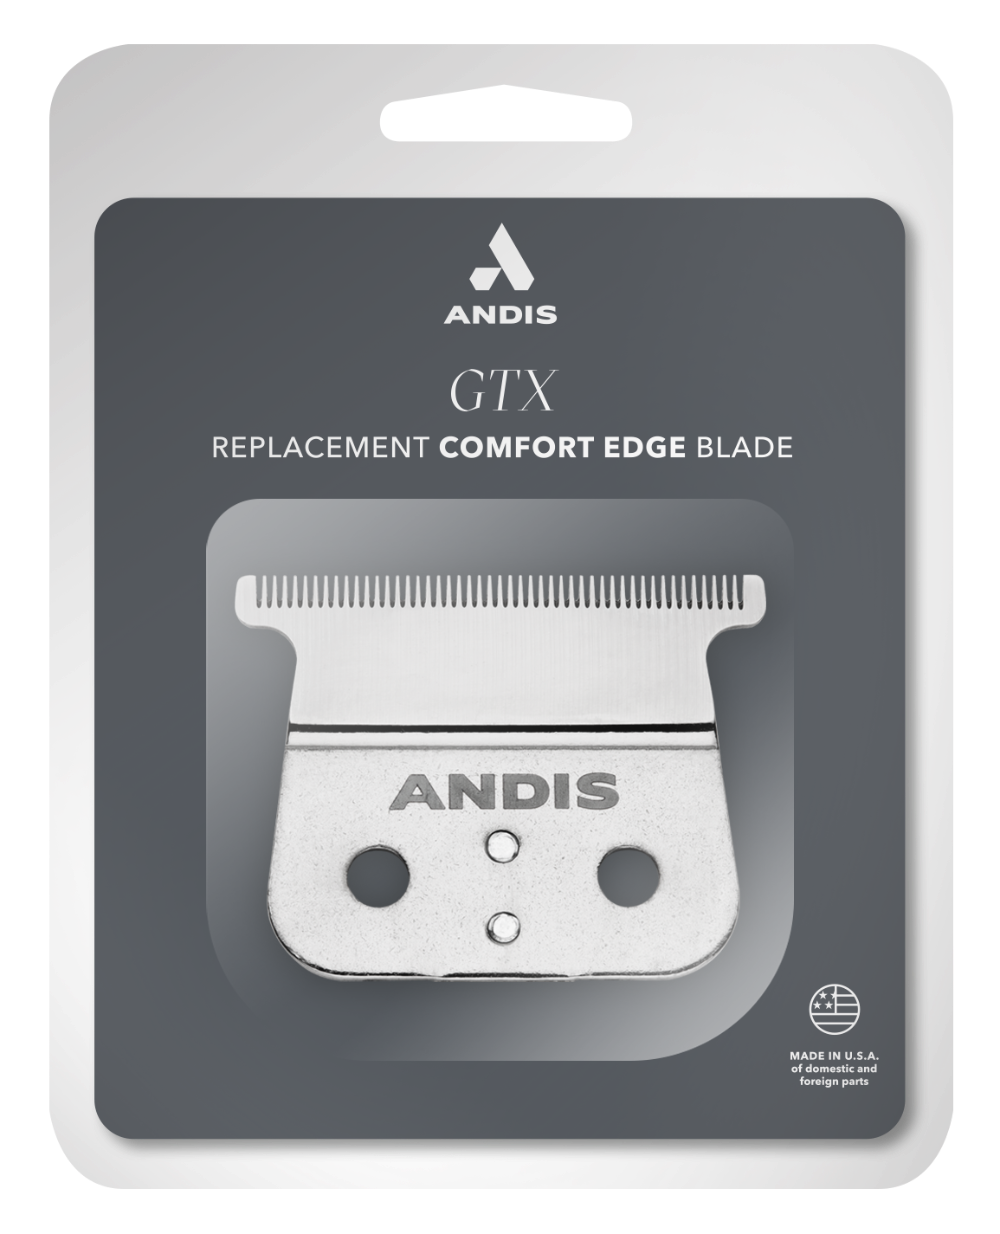 Andis GTX Deep Tooth T-Outliner Replacement Blade - Stainless Steel